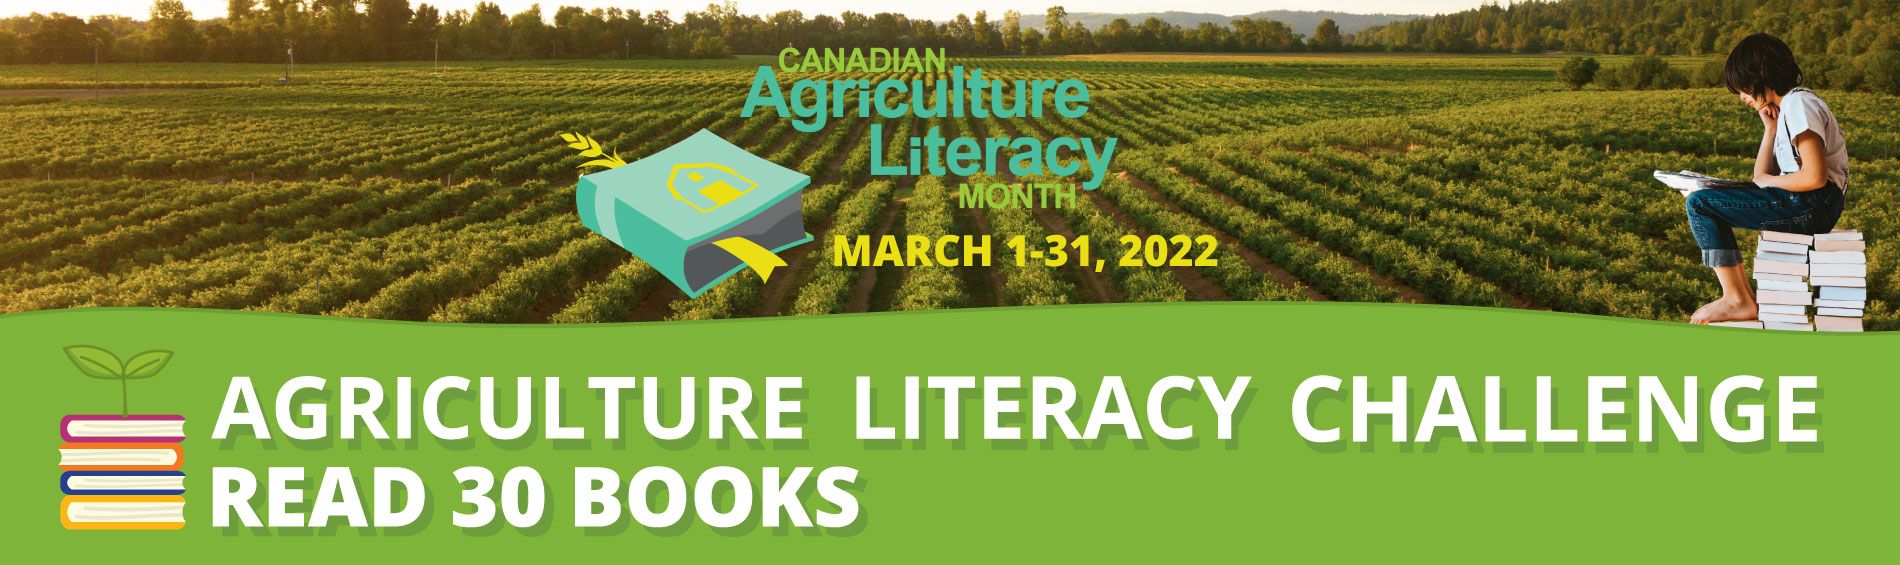 Agriculture Literacy Challenge